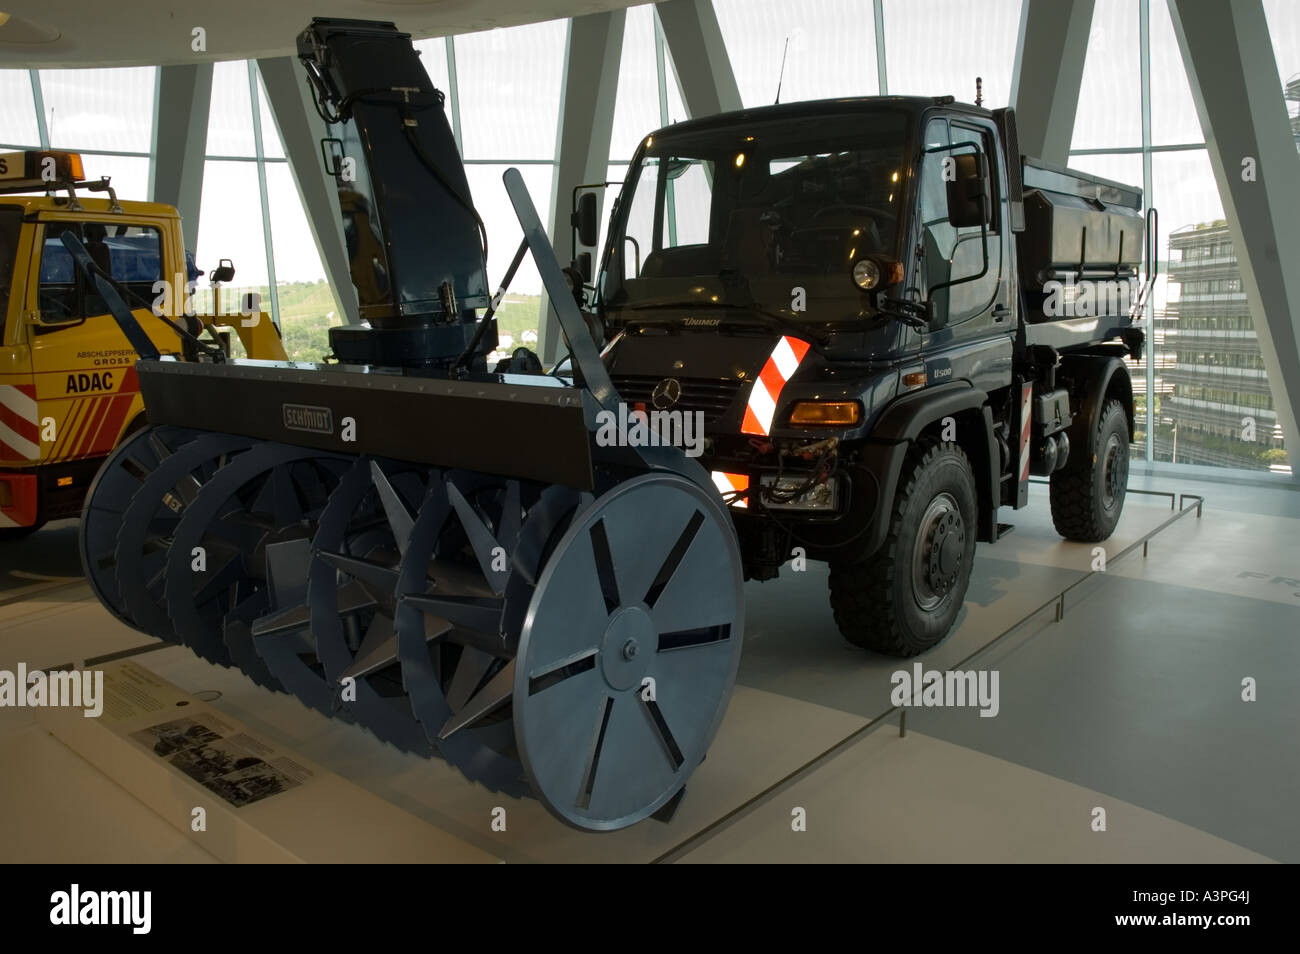 Mercedes Benz Unimog Snow clearing vehicle in the Mercedes Benz Museum Stock Photo